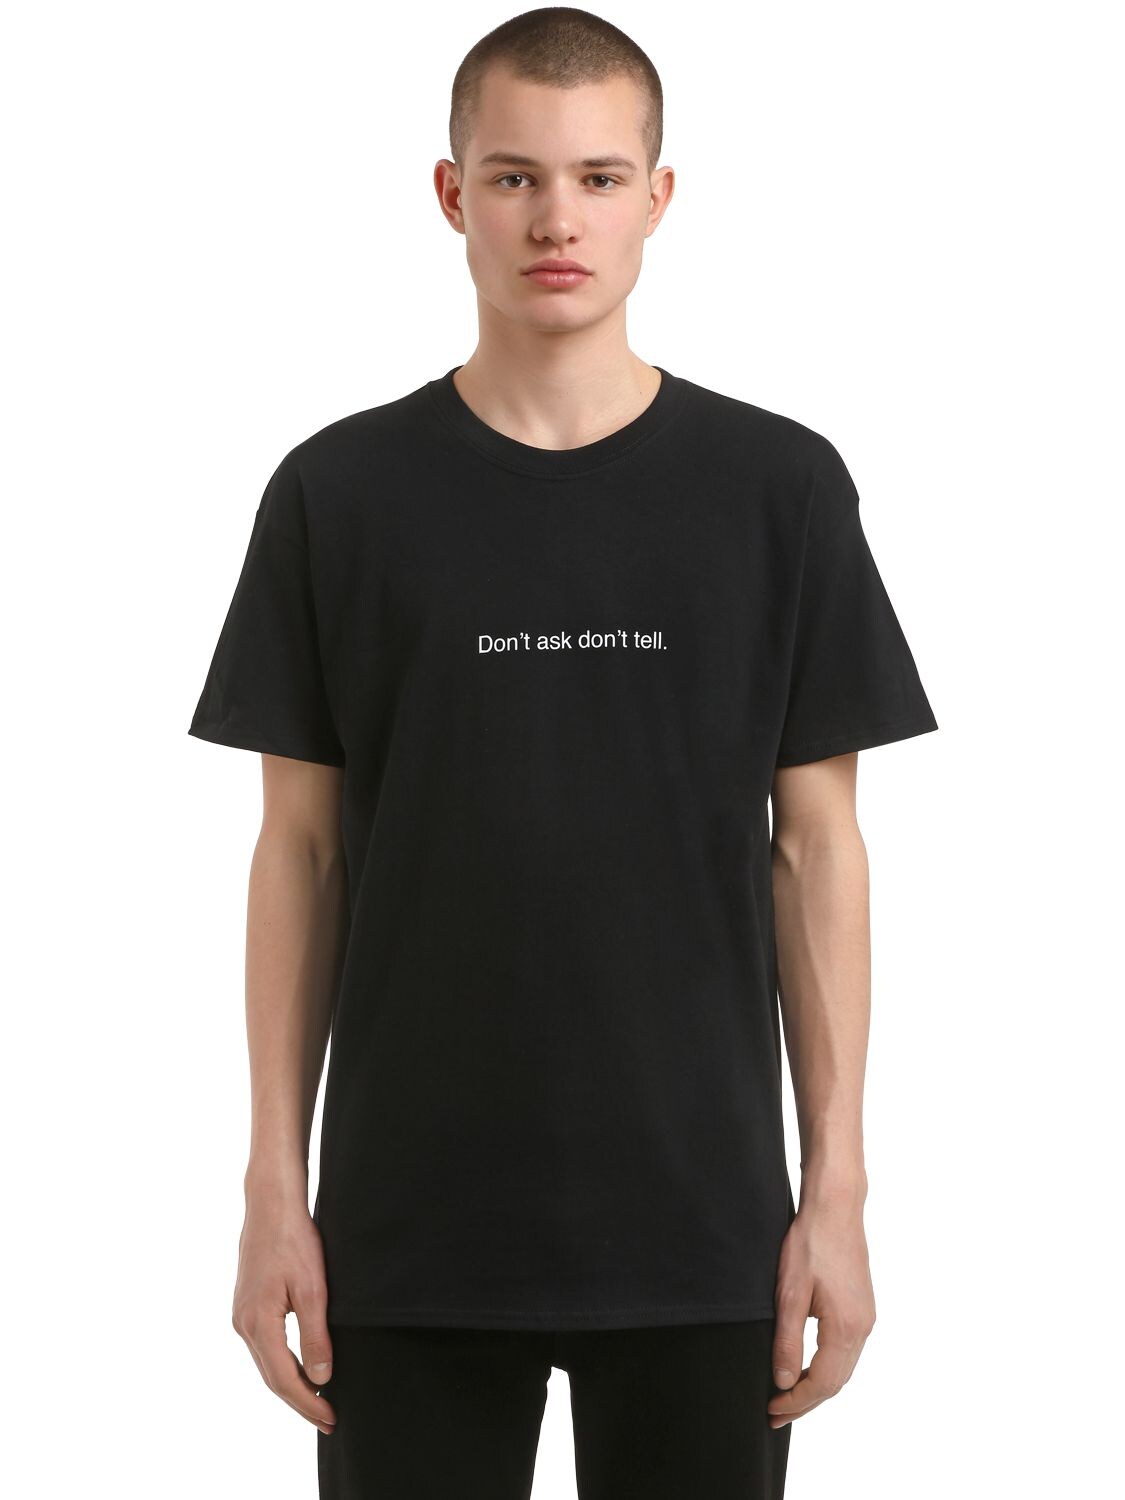 Famt - Fuck Art Make Tees Don't Ask, Don't Tell Cotton T-shirt In Black